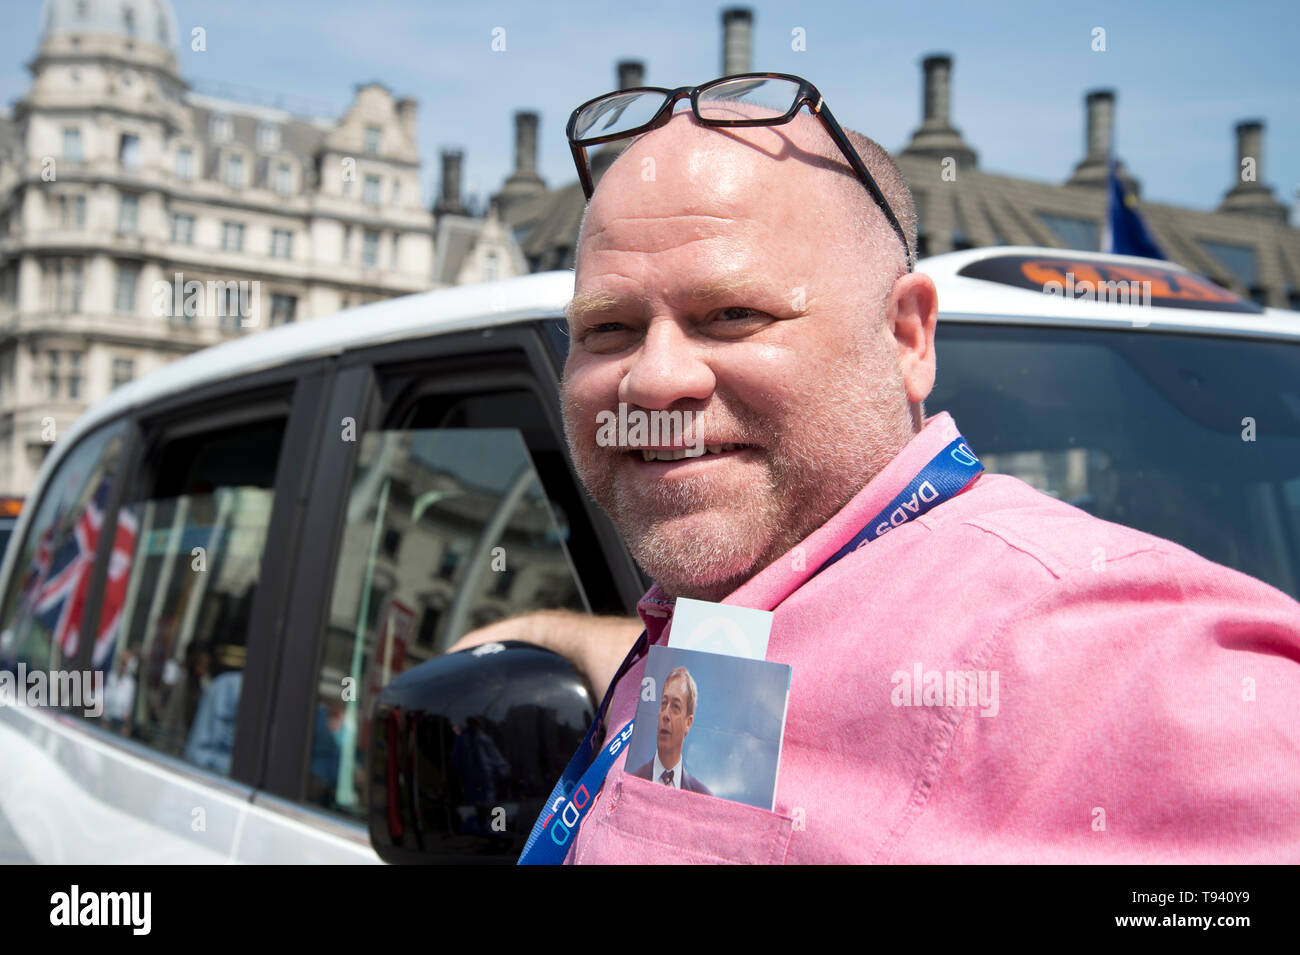 Parliament Square, Westminster, London. May 16th 2019. Striking taxi driver with a photo of Nigel Farage in his pocket. Stock Photo